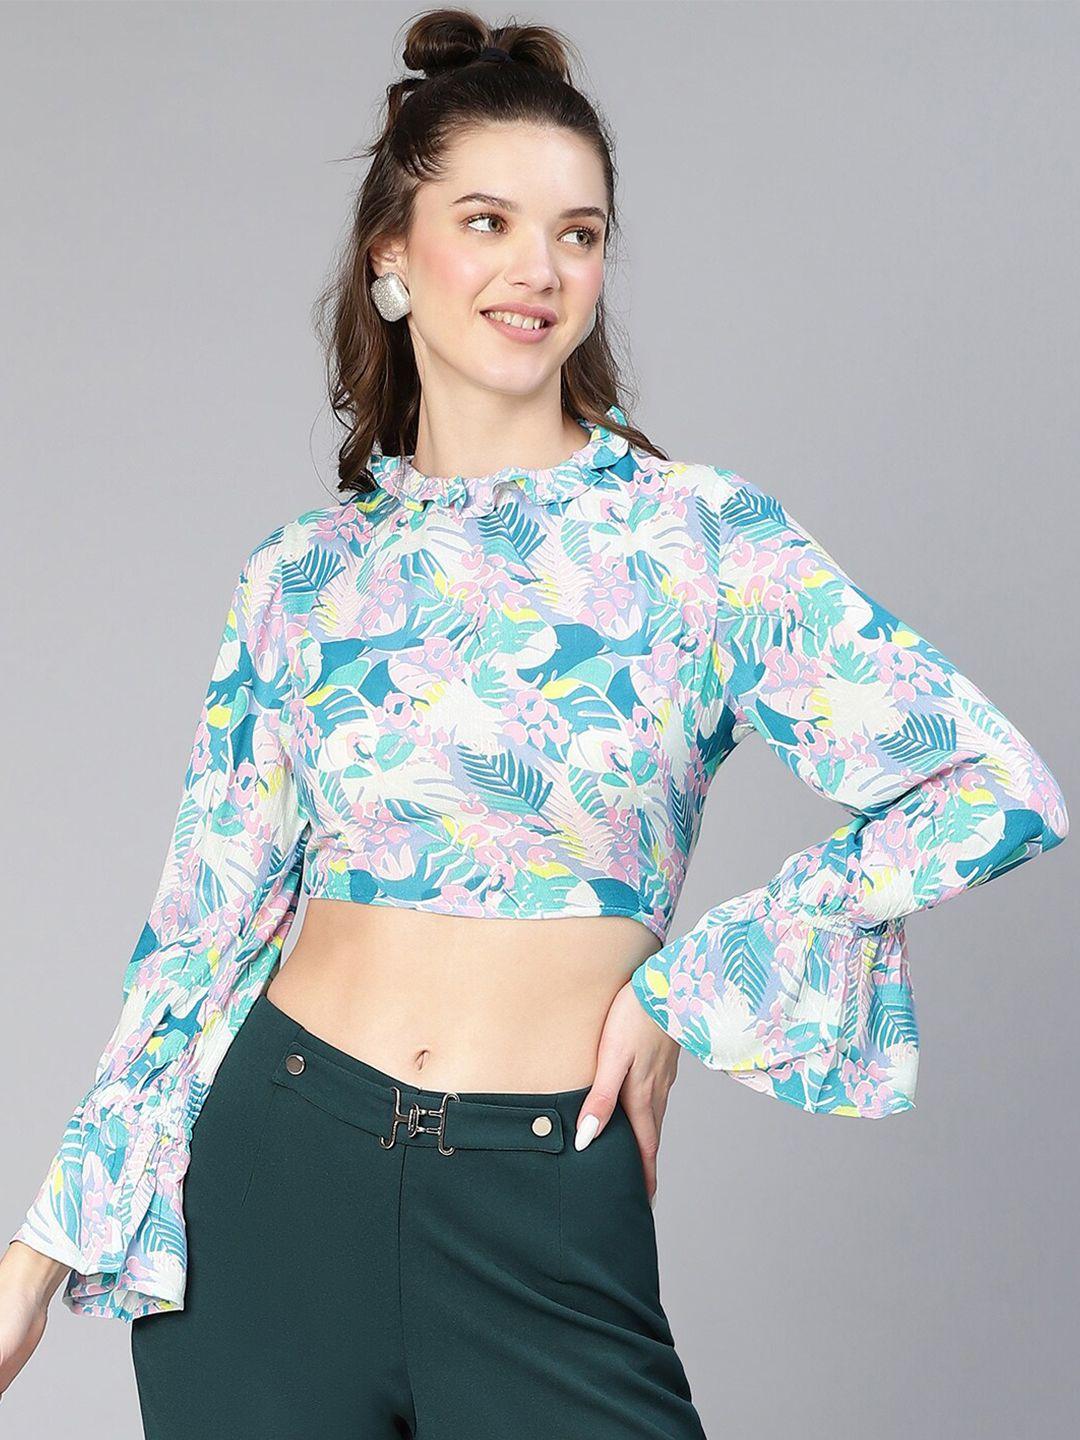 oxolloxo floral printed bell sleeves crop top